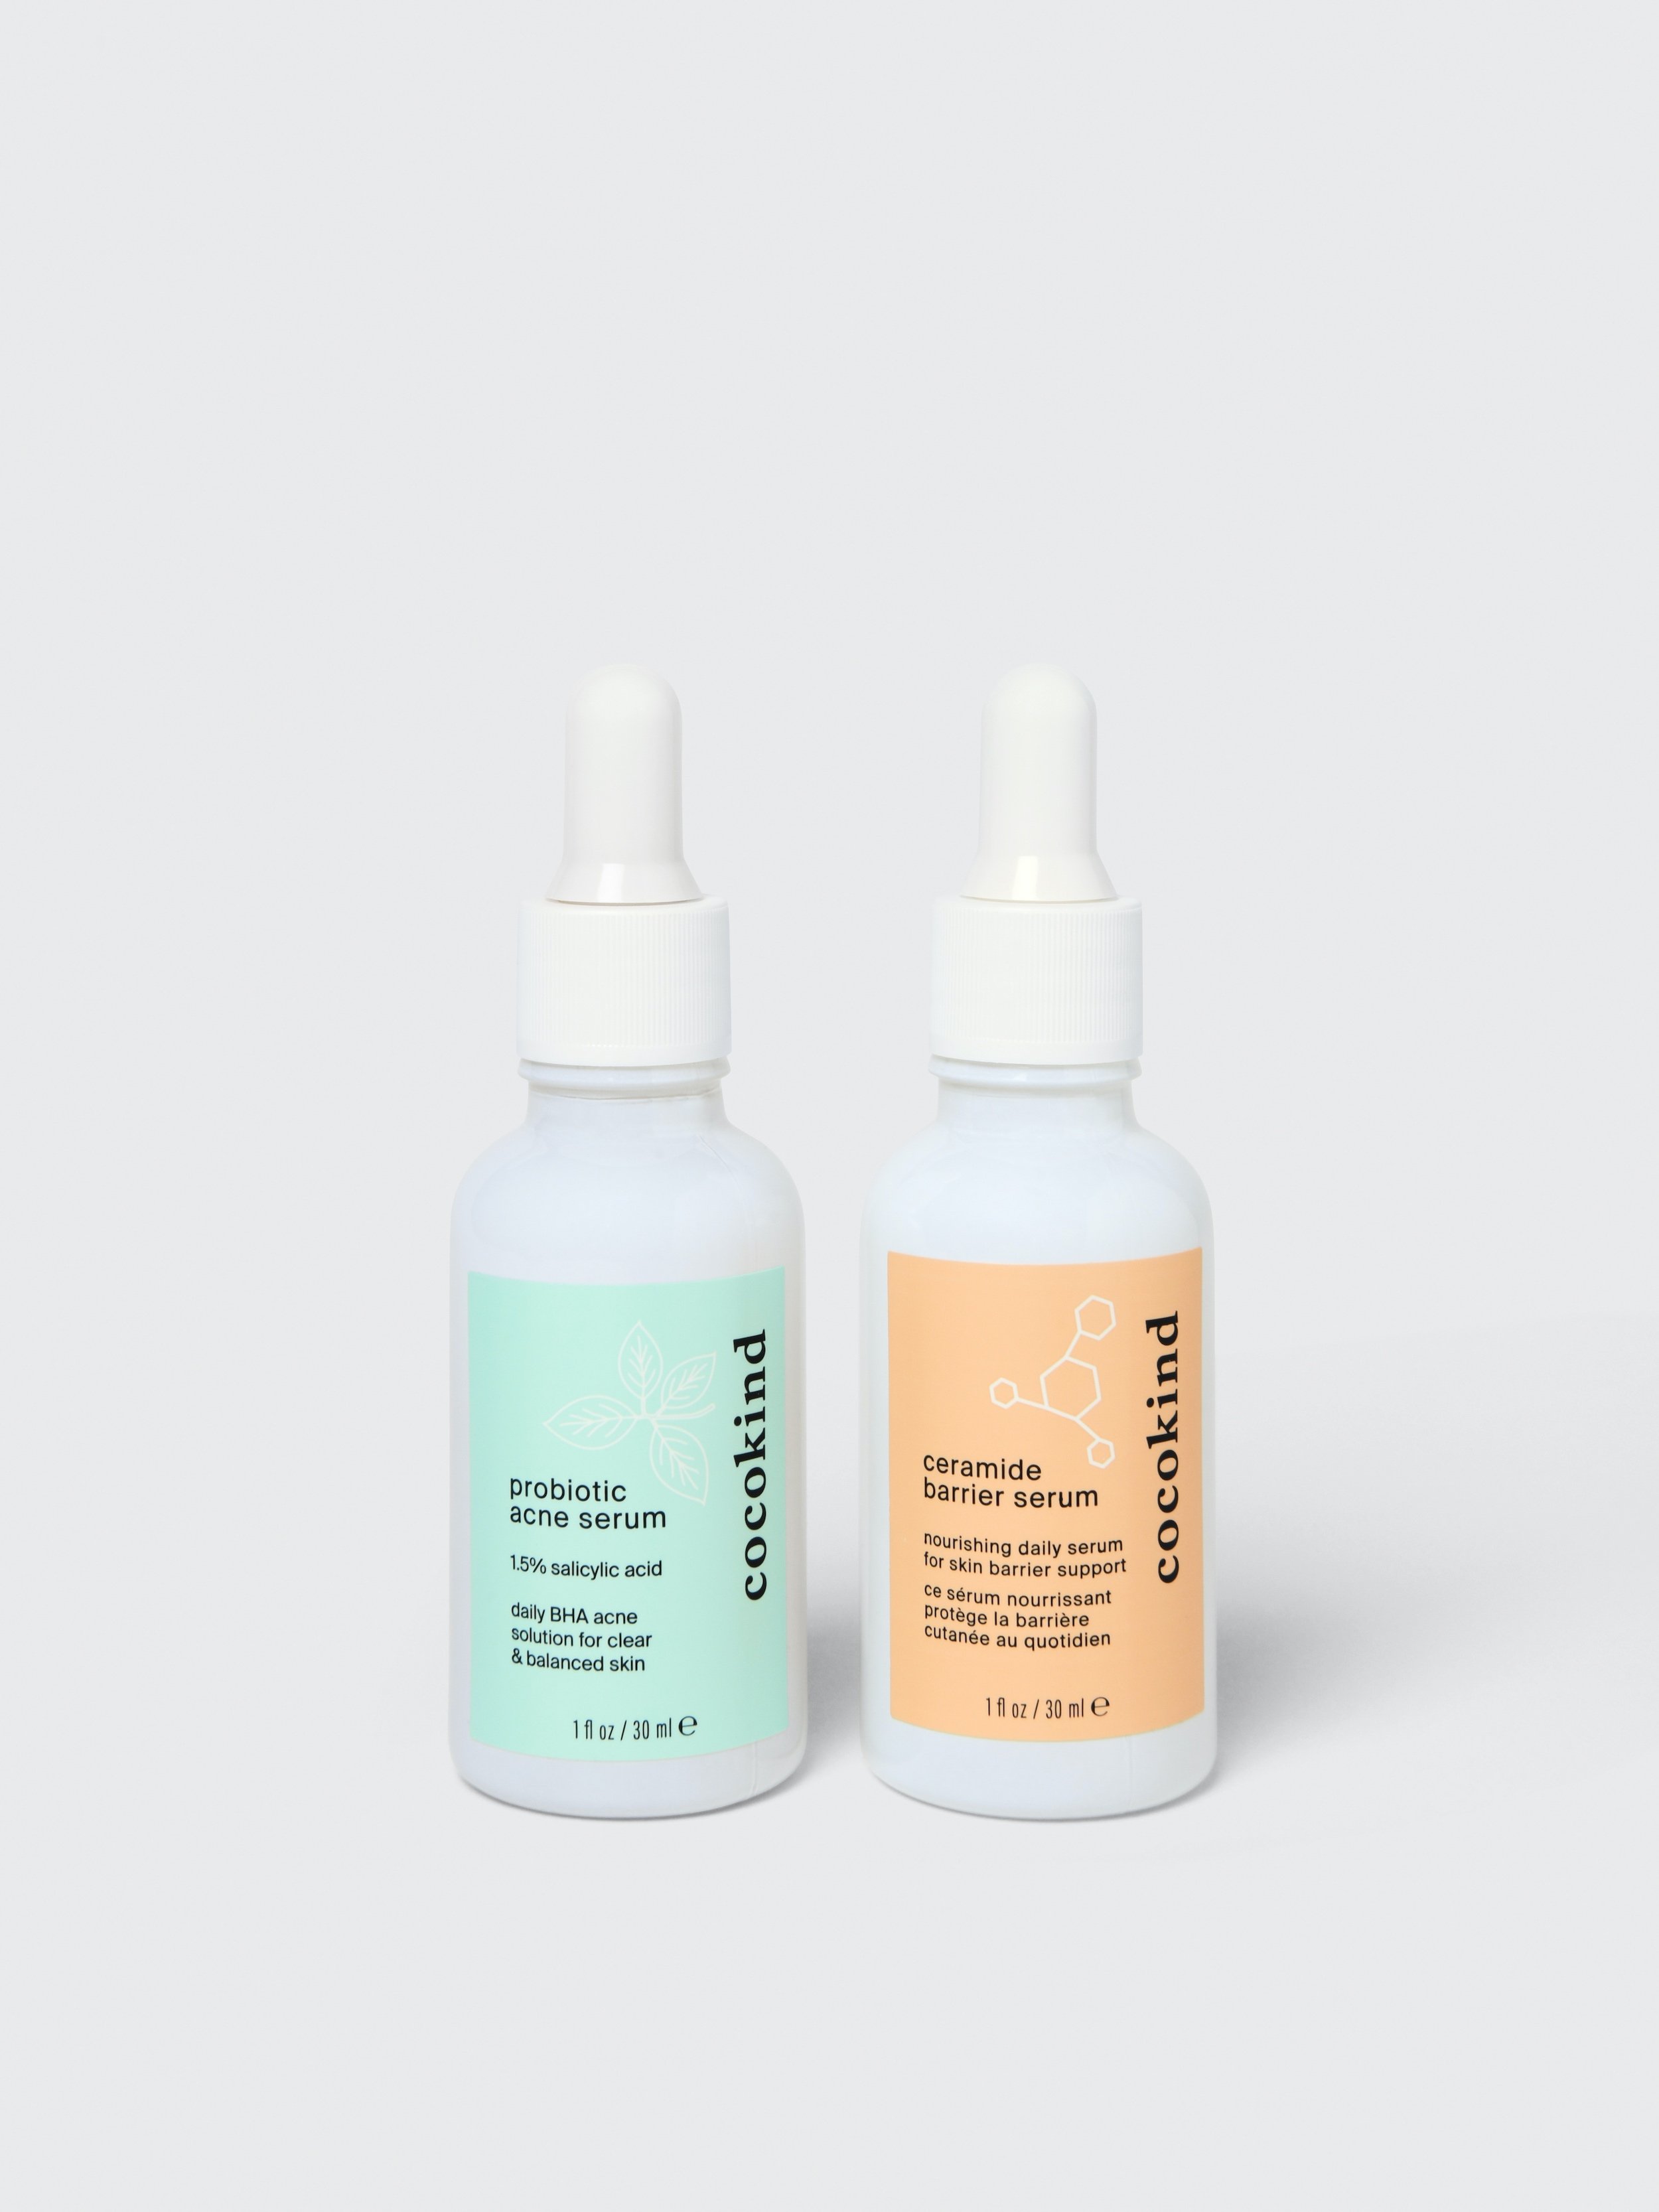 cocokind - serums duo